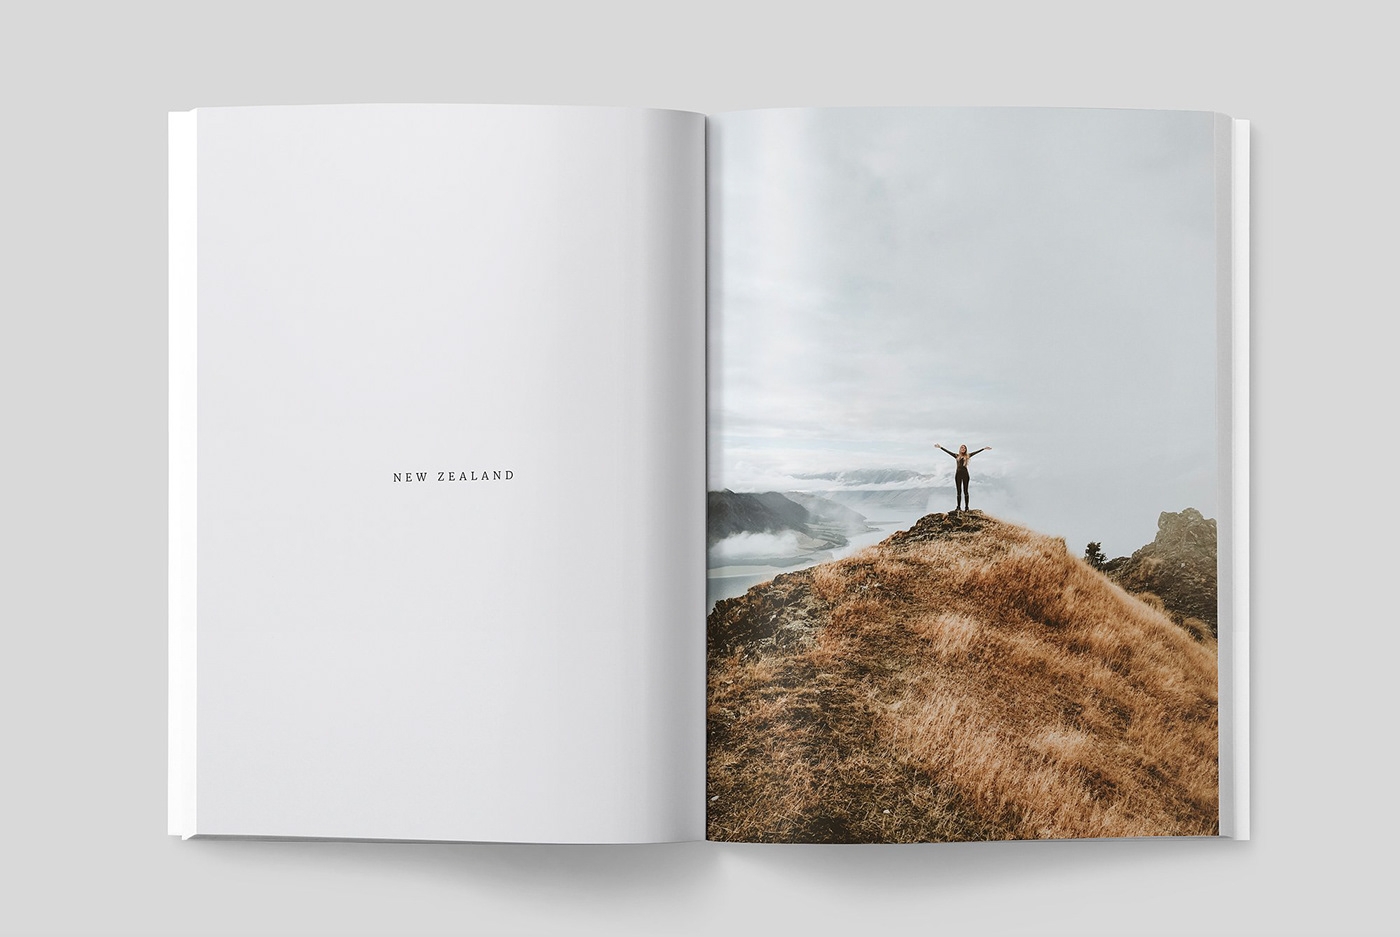 magazine template brochure modern contemporary minimal InDesign Layout architecture Travel